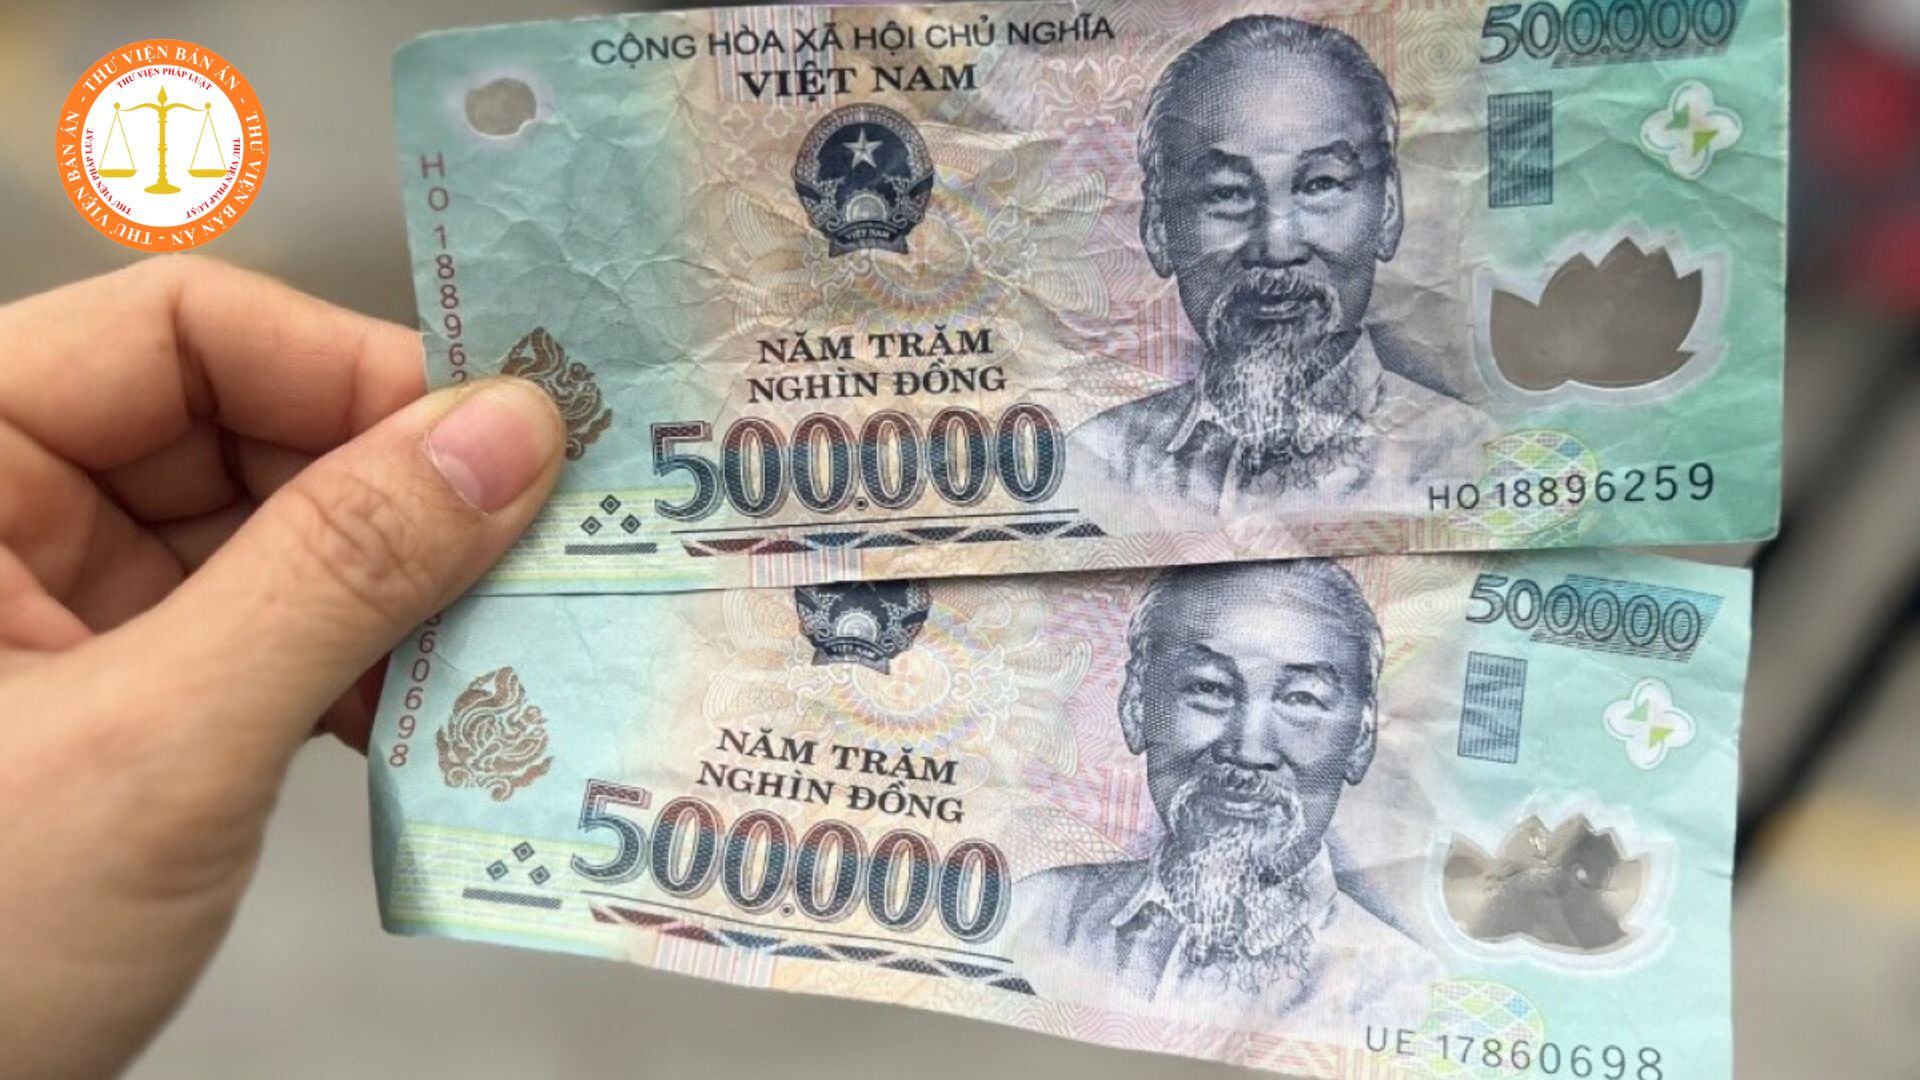 Collection of judgment on possession of counterfeit money in Vietnam